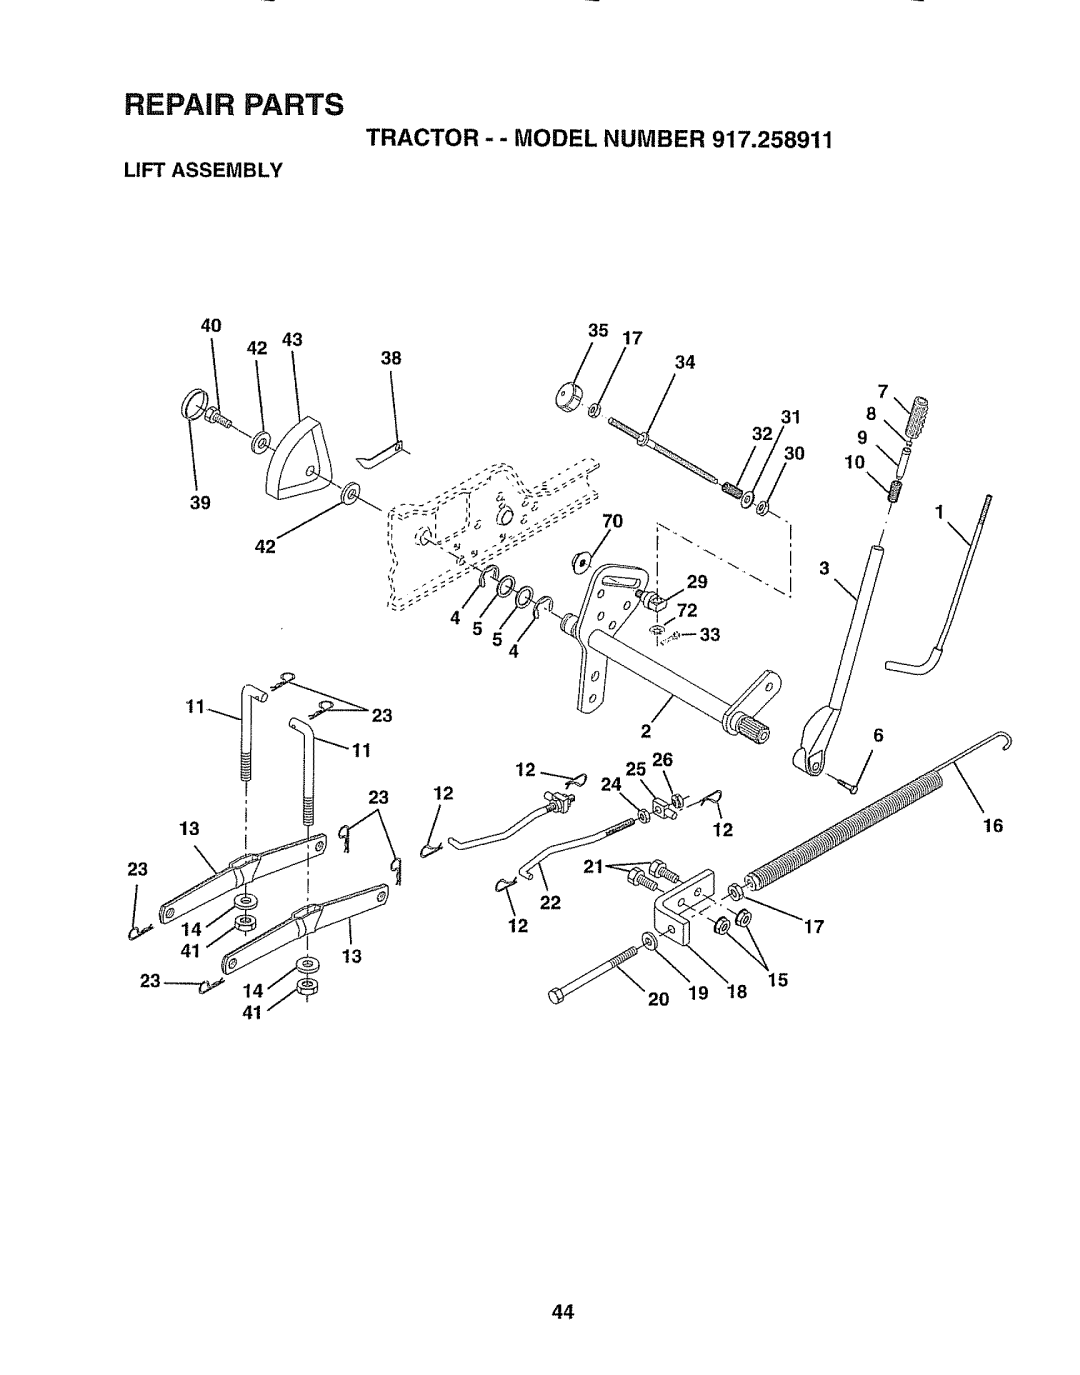 Craftsman 917.258911 owner manual Lift Assembly, 15 2O 19, 40 35 42 3834 39, 4 2 12, Repair Parts, Tractor - - Model Number 